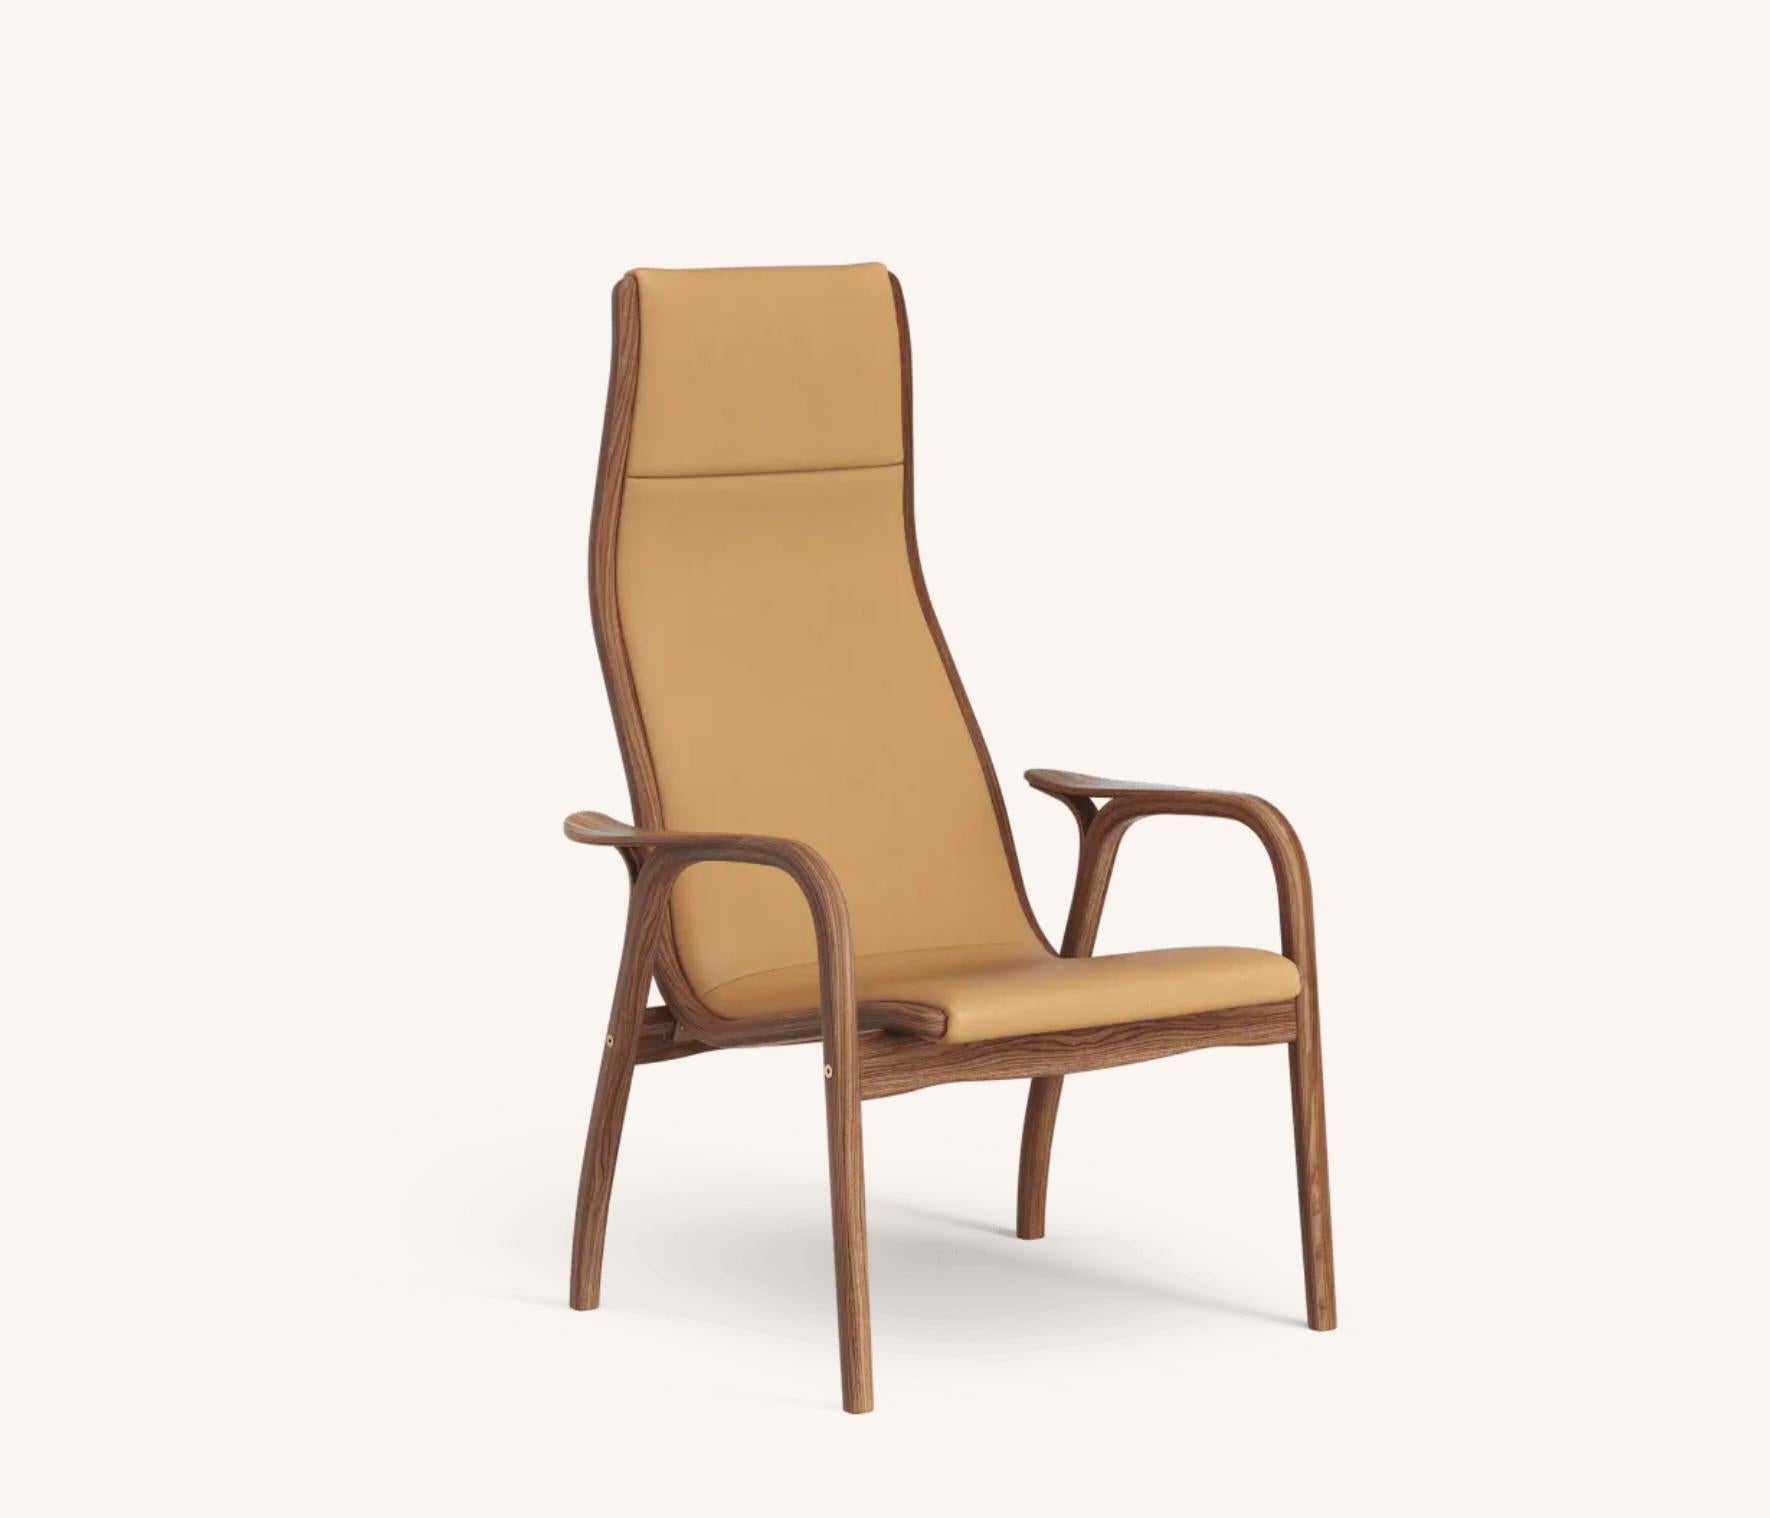 Yngve Ekström Lamino Easy Chair by Swedese in Walnut and Cognac Leather 'Elmo Baltique 43001'. New, design from 1956.

The Lamino by Yngve Ekström is one of the most iconic Scandinavian easy chairs. Designed in 1956, this chair has never gotten